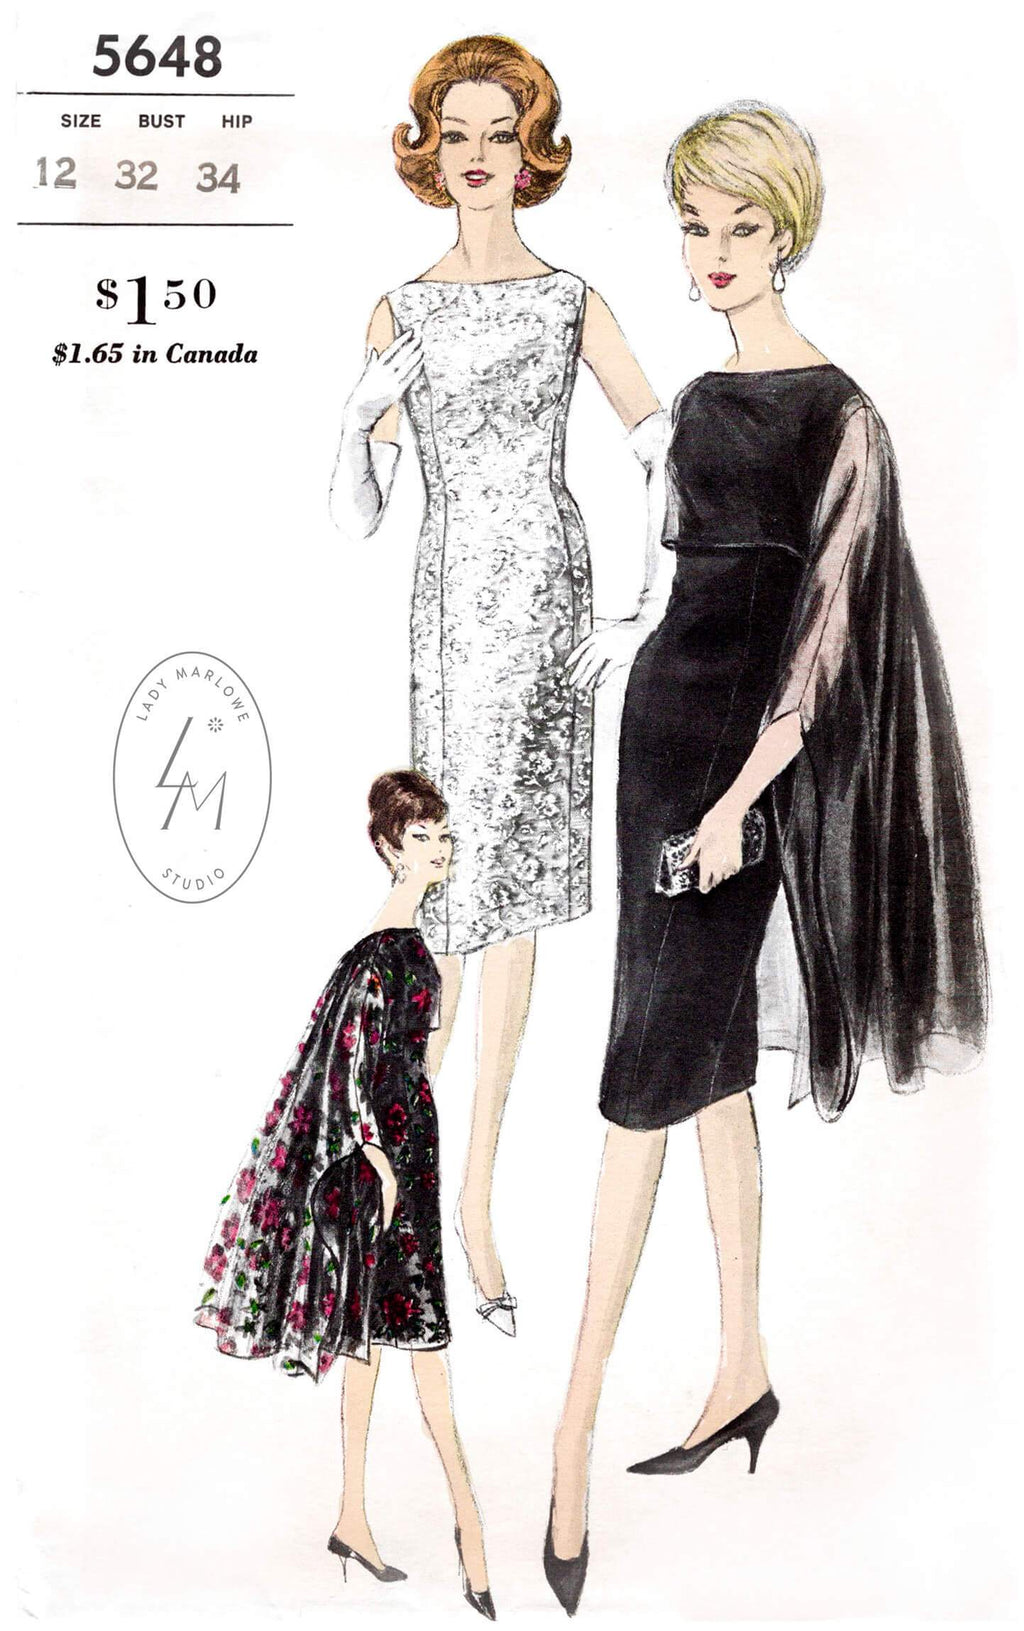 Vogue 5648 1960s cocktail dress sewing pattern 1950s